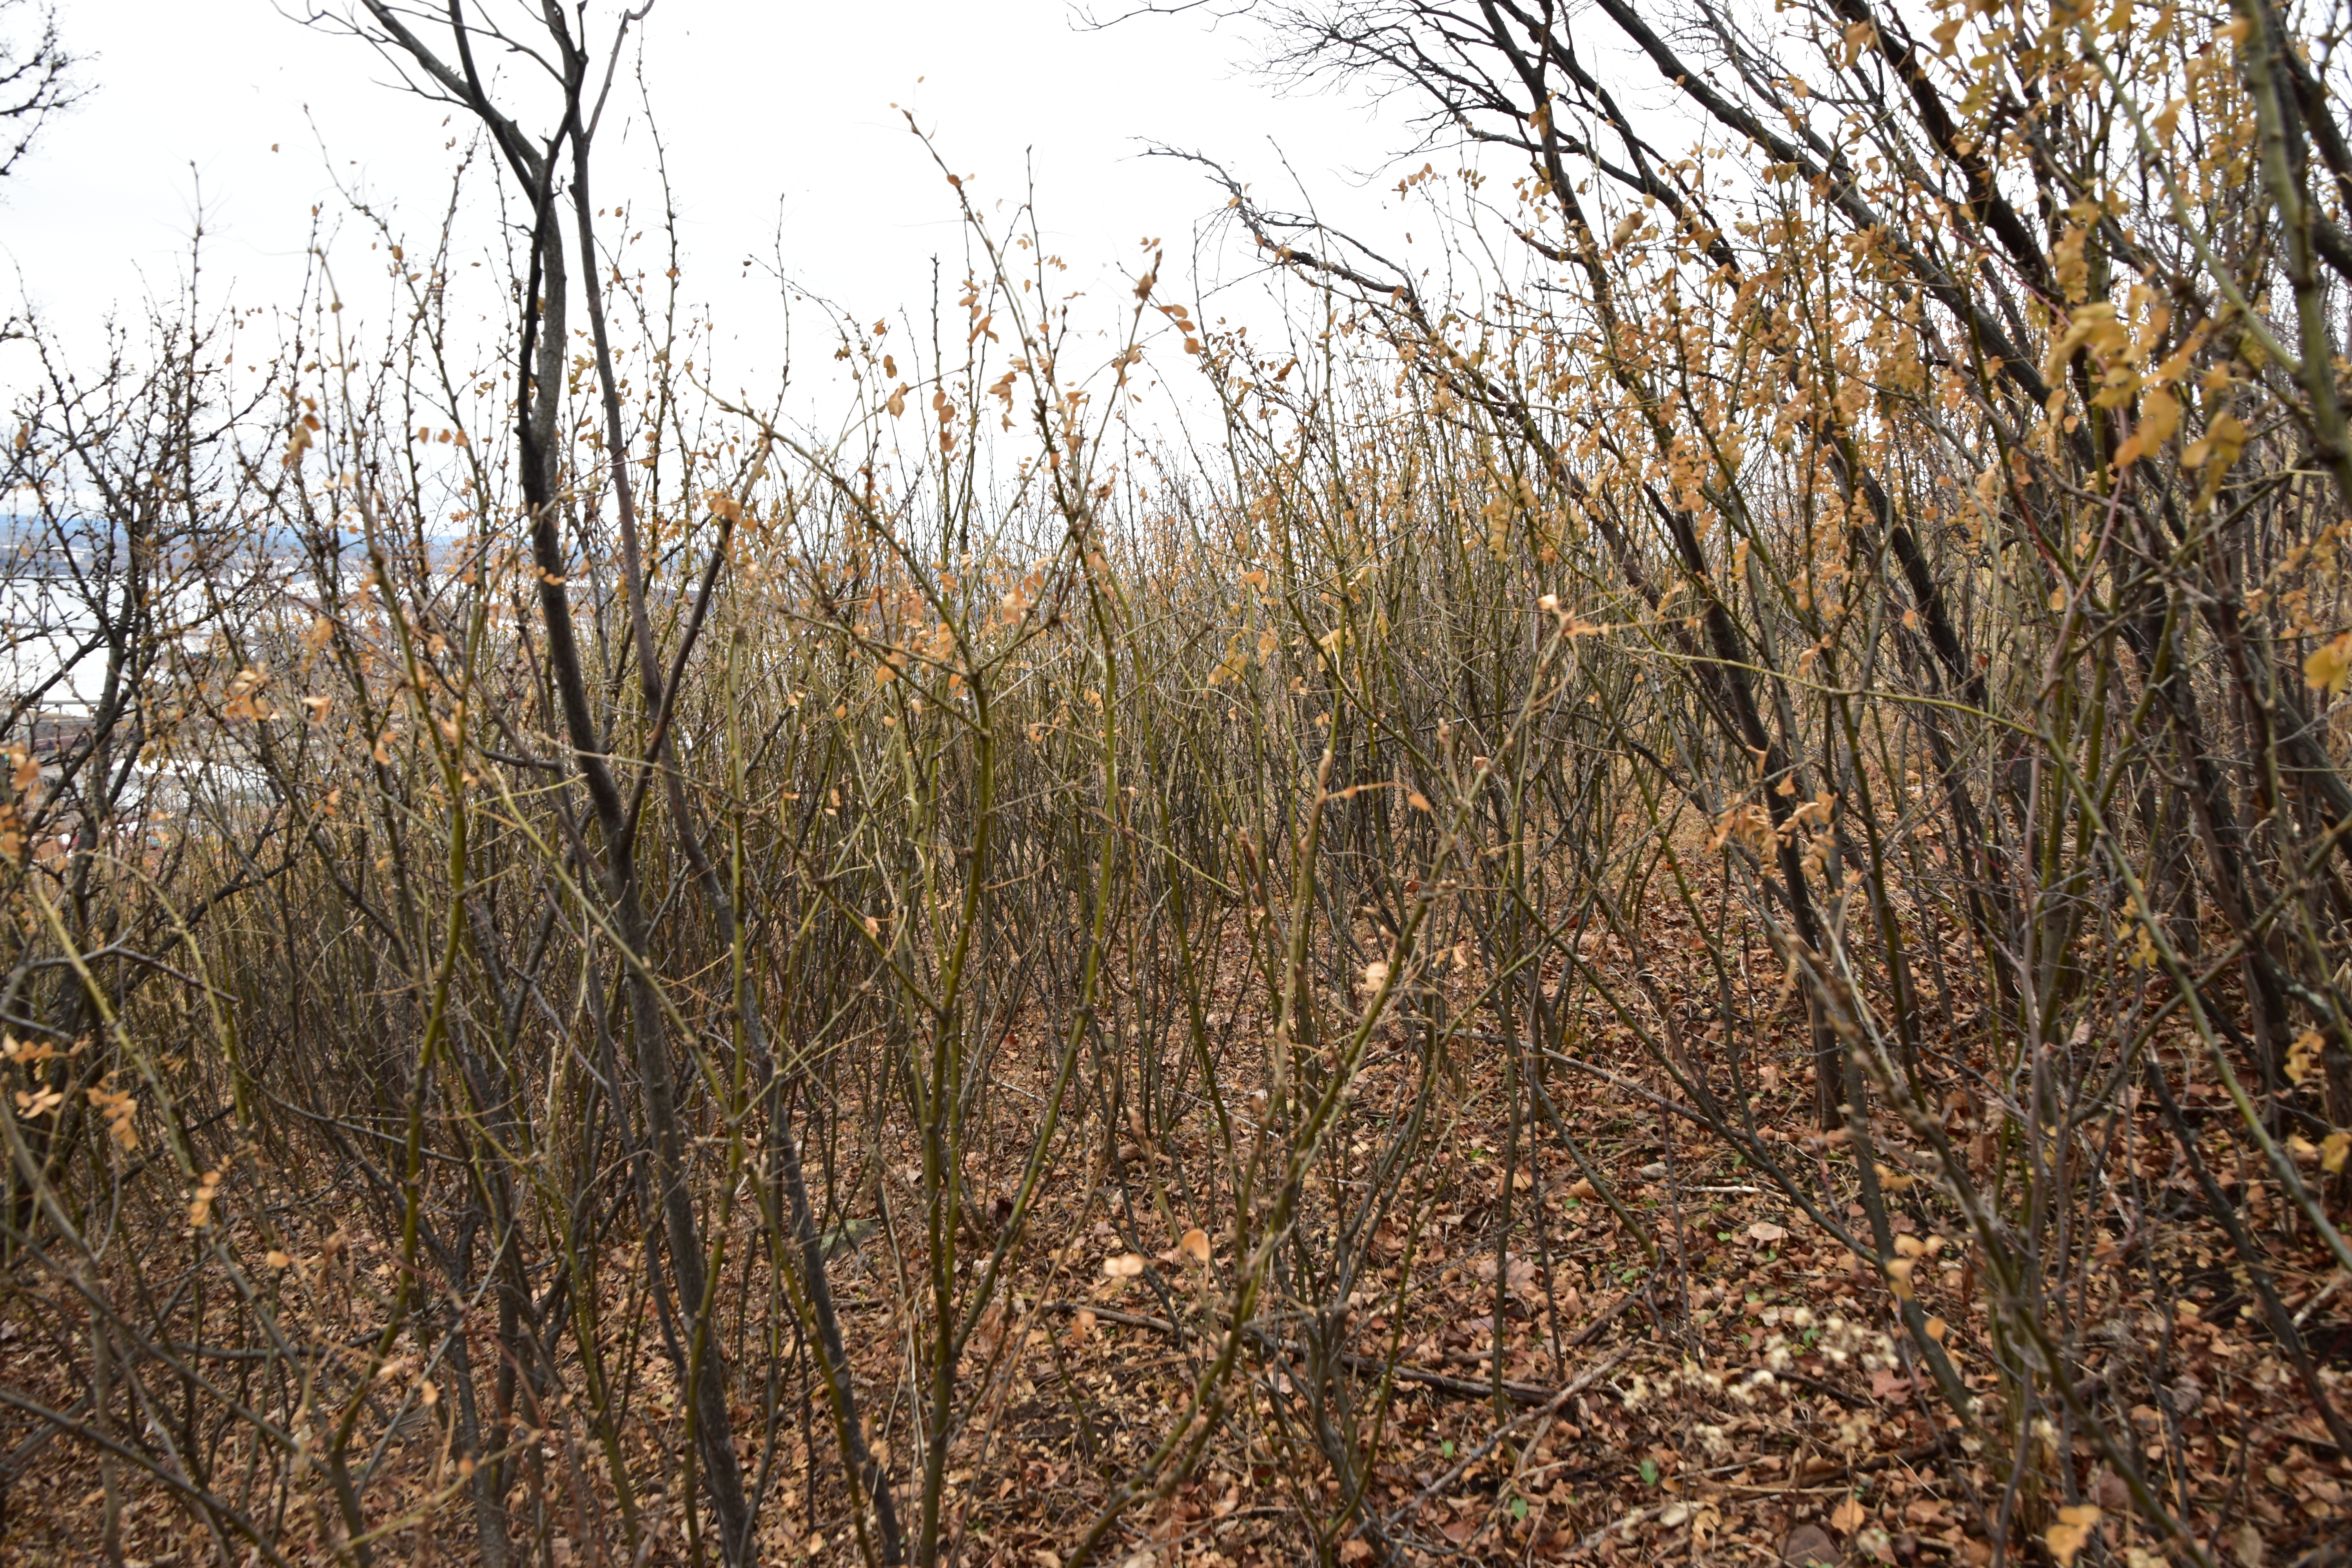 Picture of a nearly leafless stems of a Siberian peashrub infestation in Duluth Minnesota.